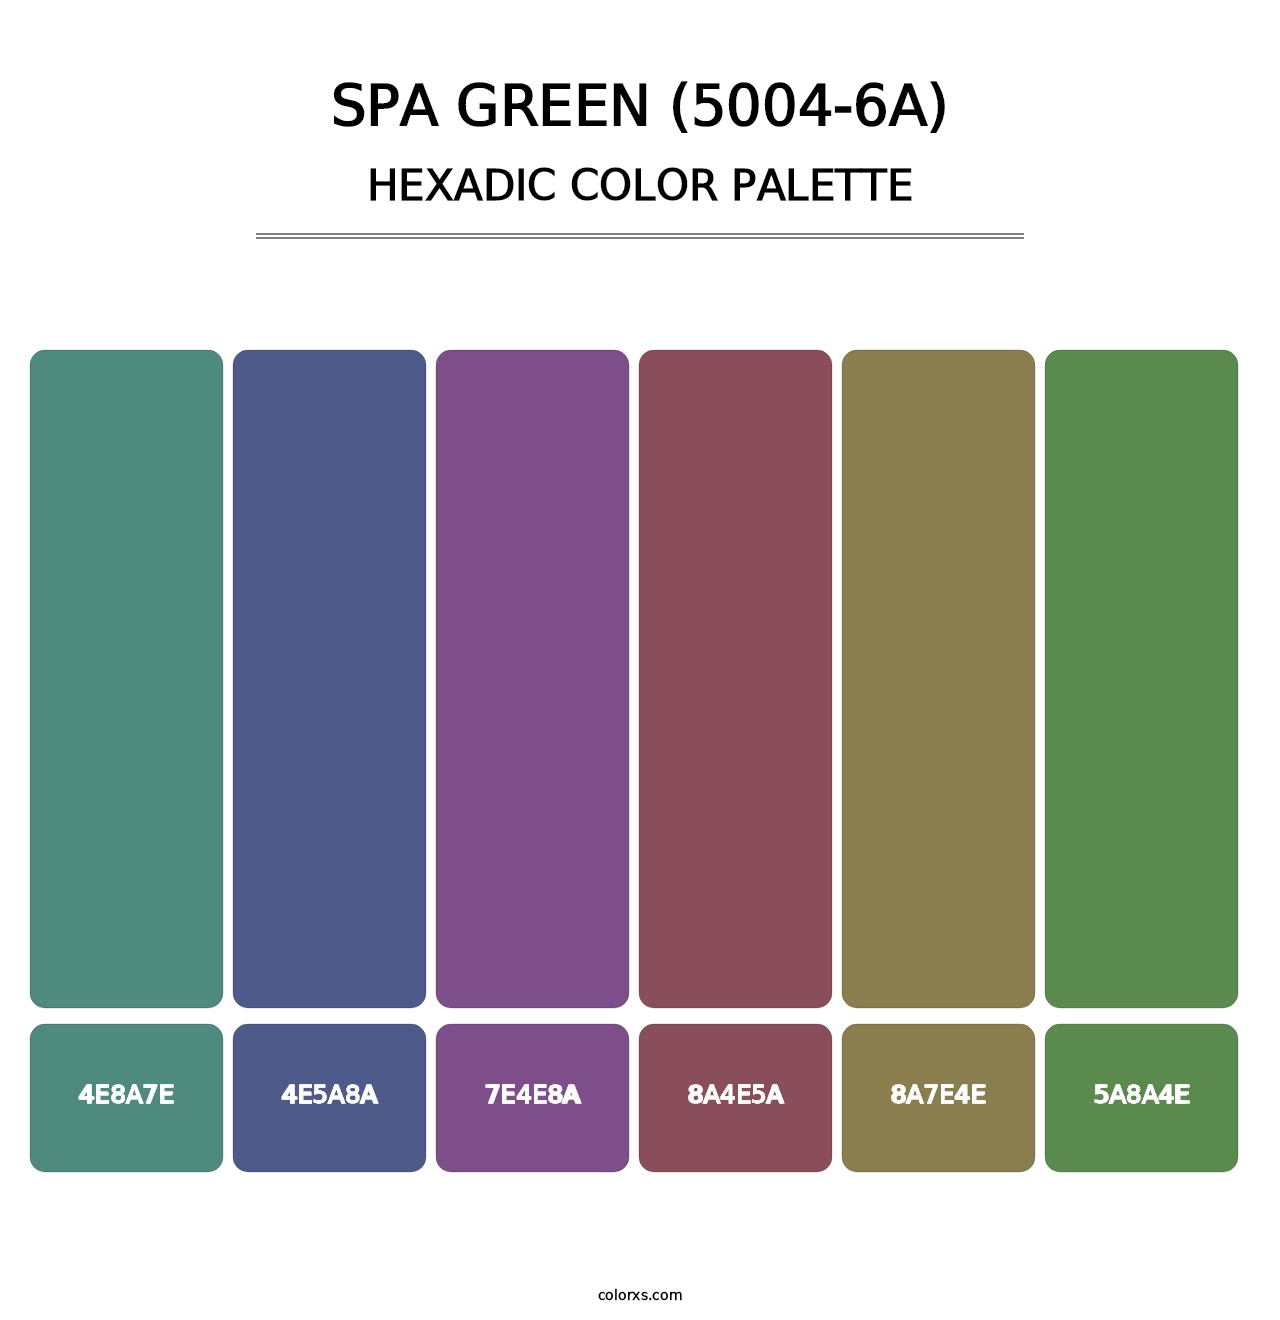 Spa Green (5004-6A) - Hexadic Color Palette